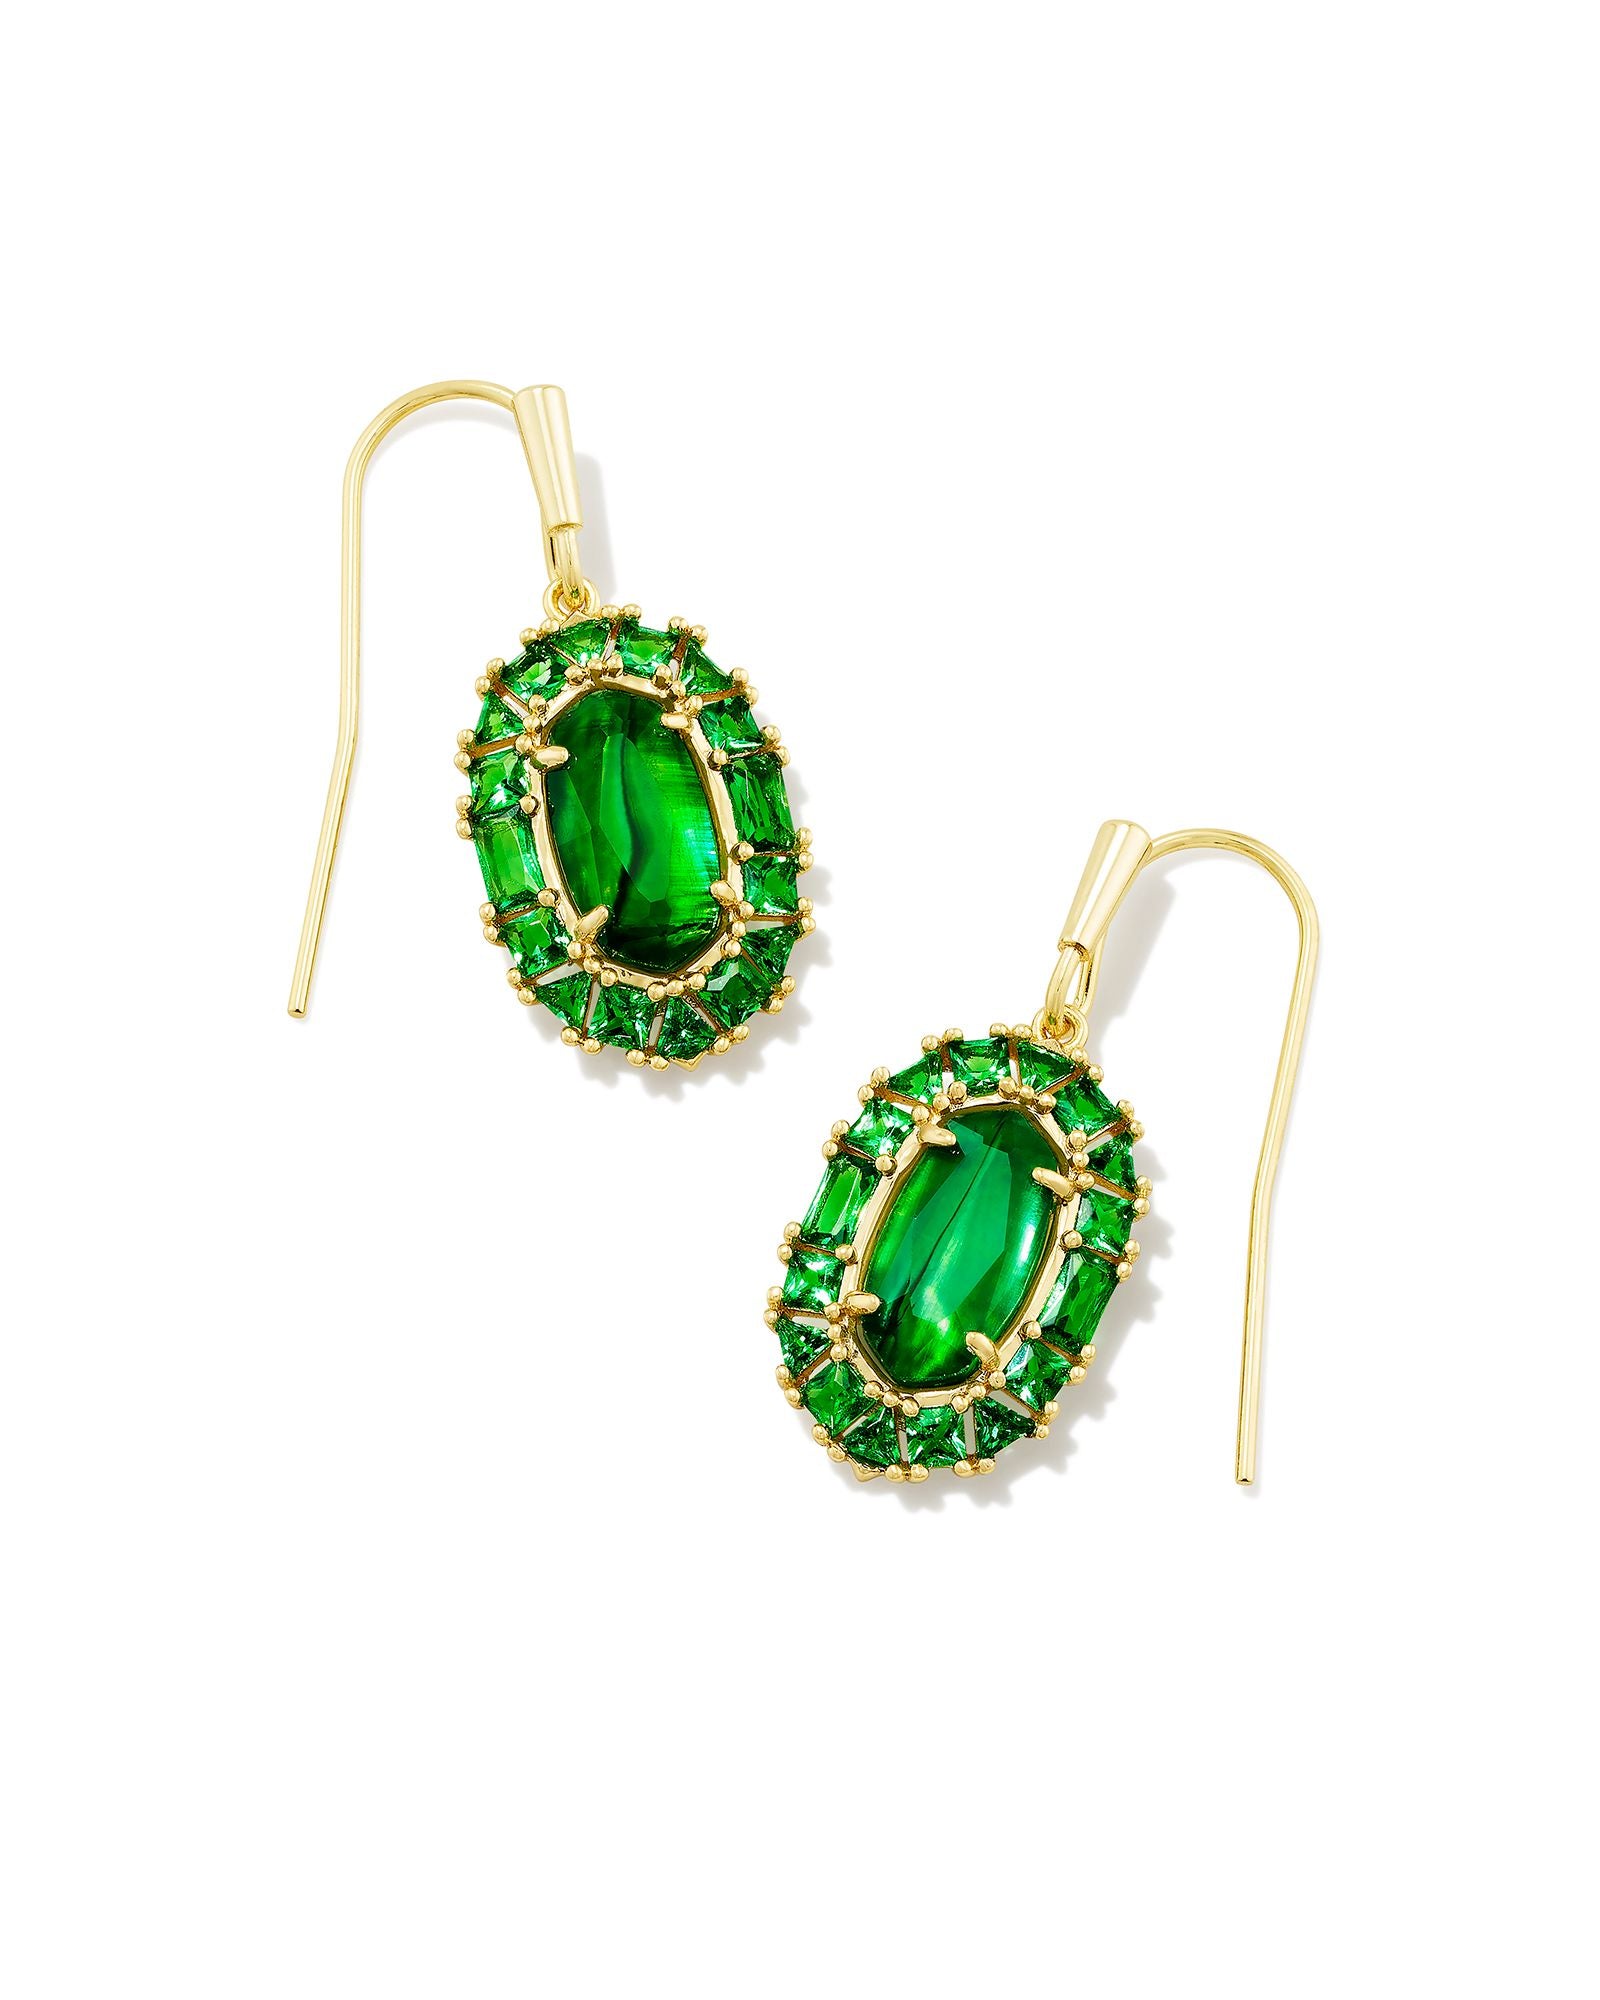 Lee Gold Crystal Frame Drop Earrings in Green Illusion